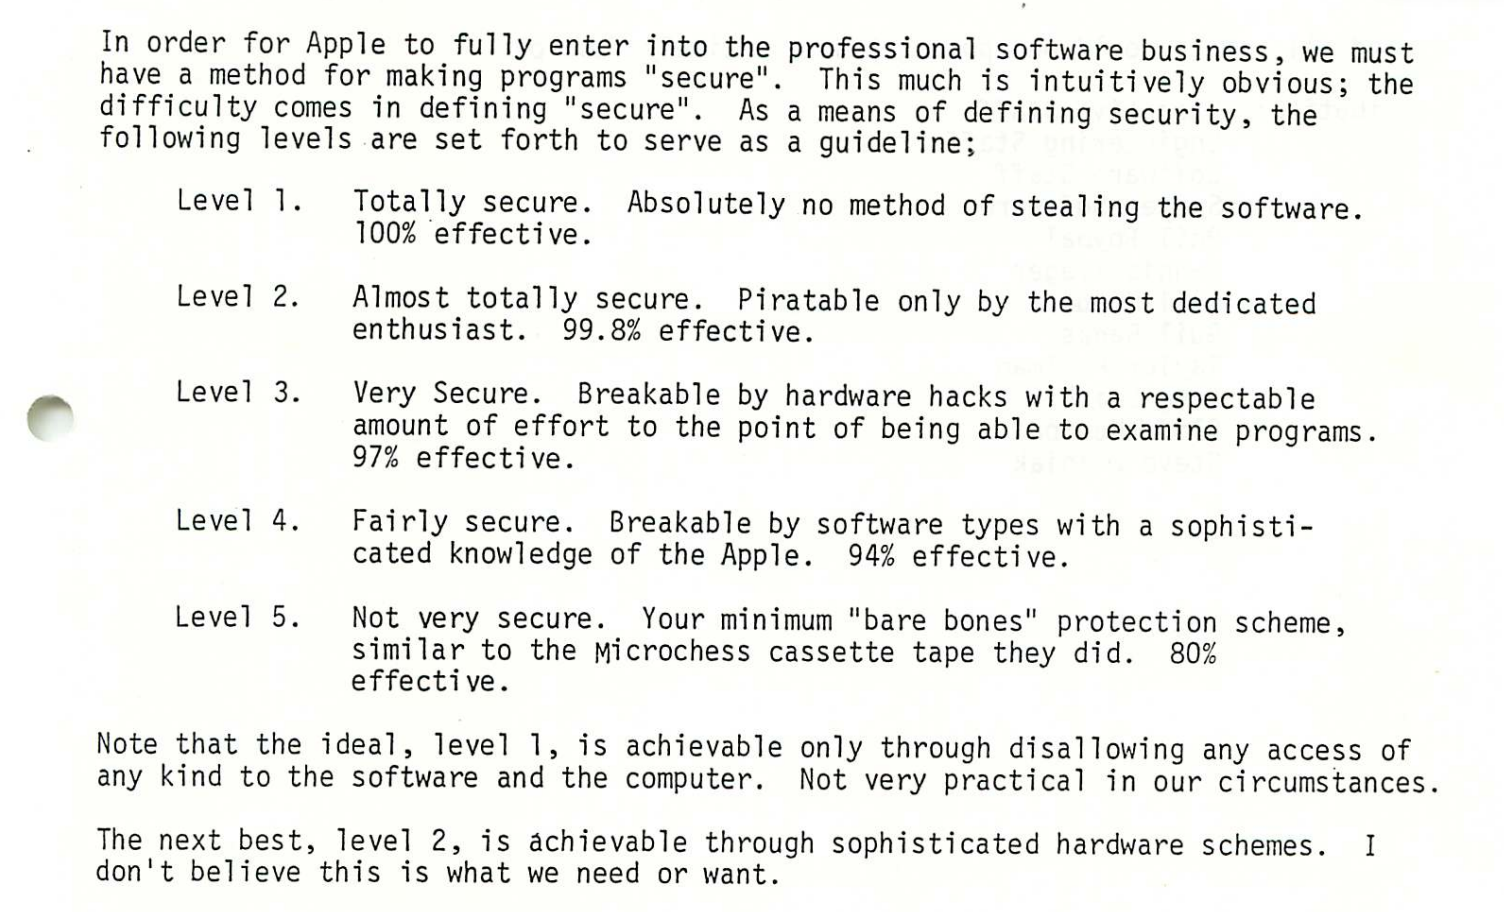 Treasure Trove Of Internal Apple Memos Discovered In Thrift Store